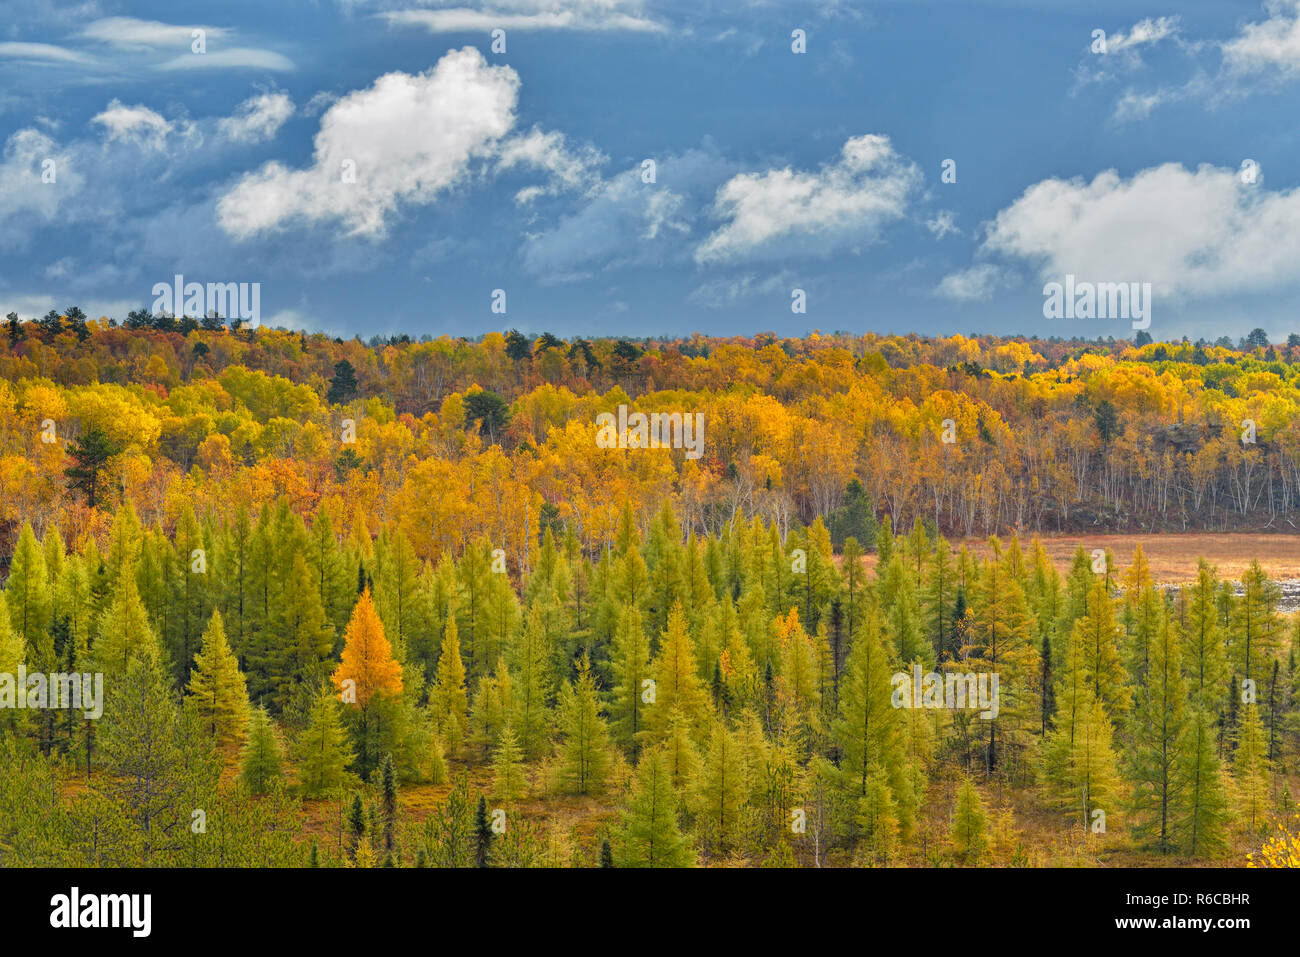 Autumn forest of larch, aspen and birch from a high viewpoint, Greater Sudbury, Ontario, Canada Stock Photo